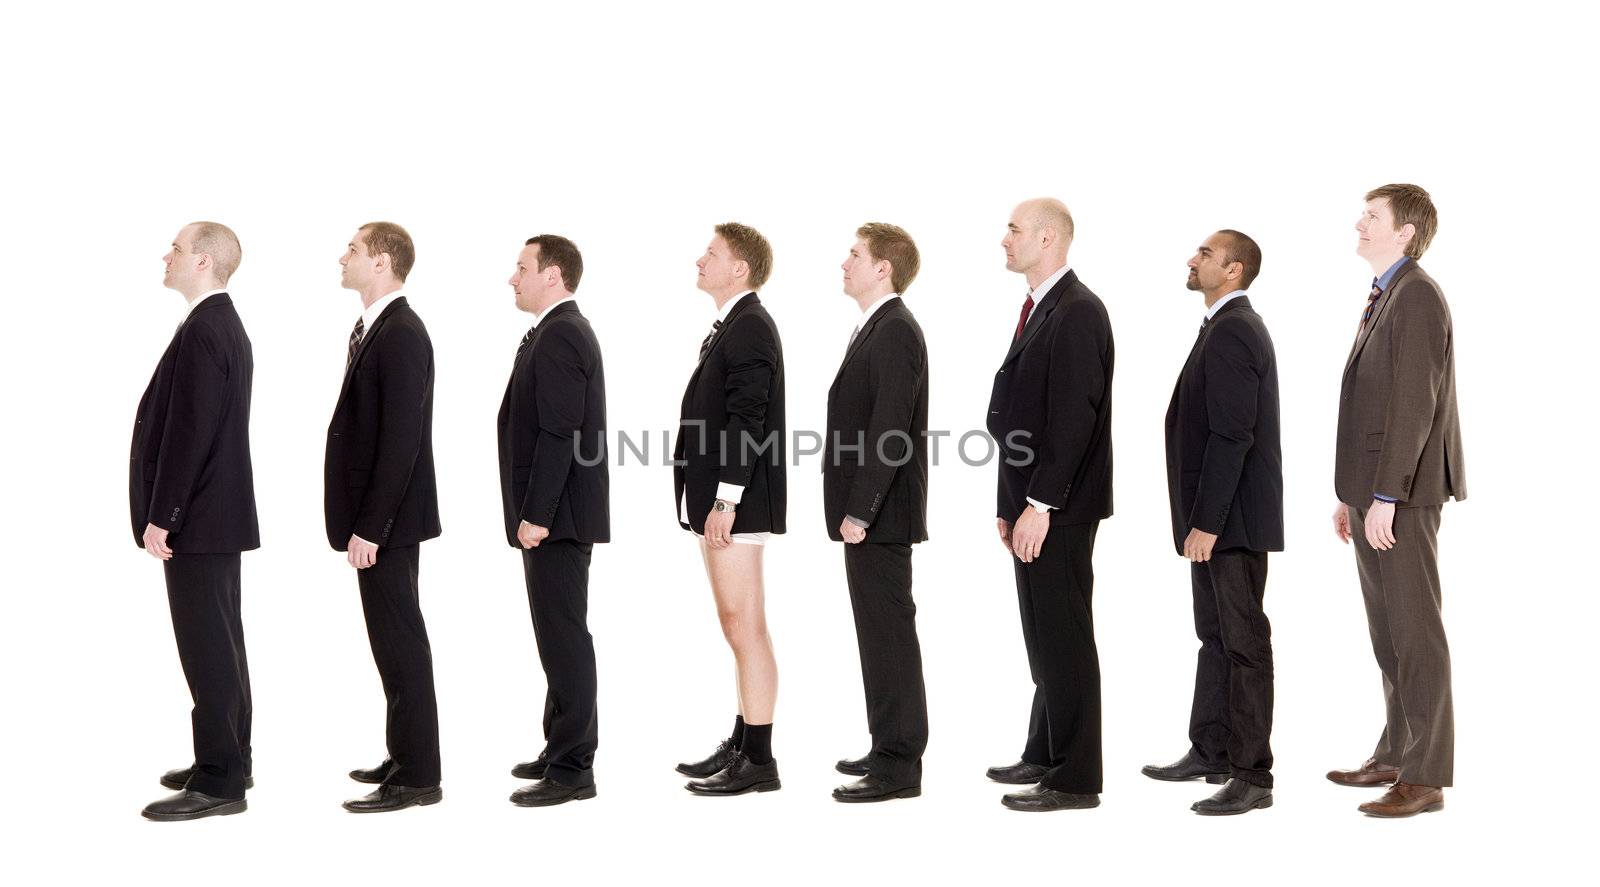 Man with his pants down standing in a line